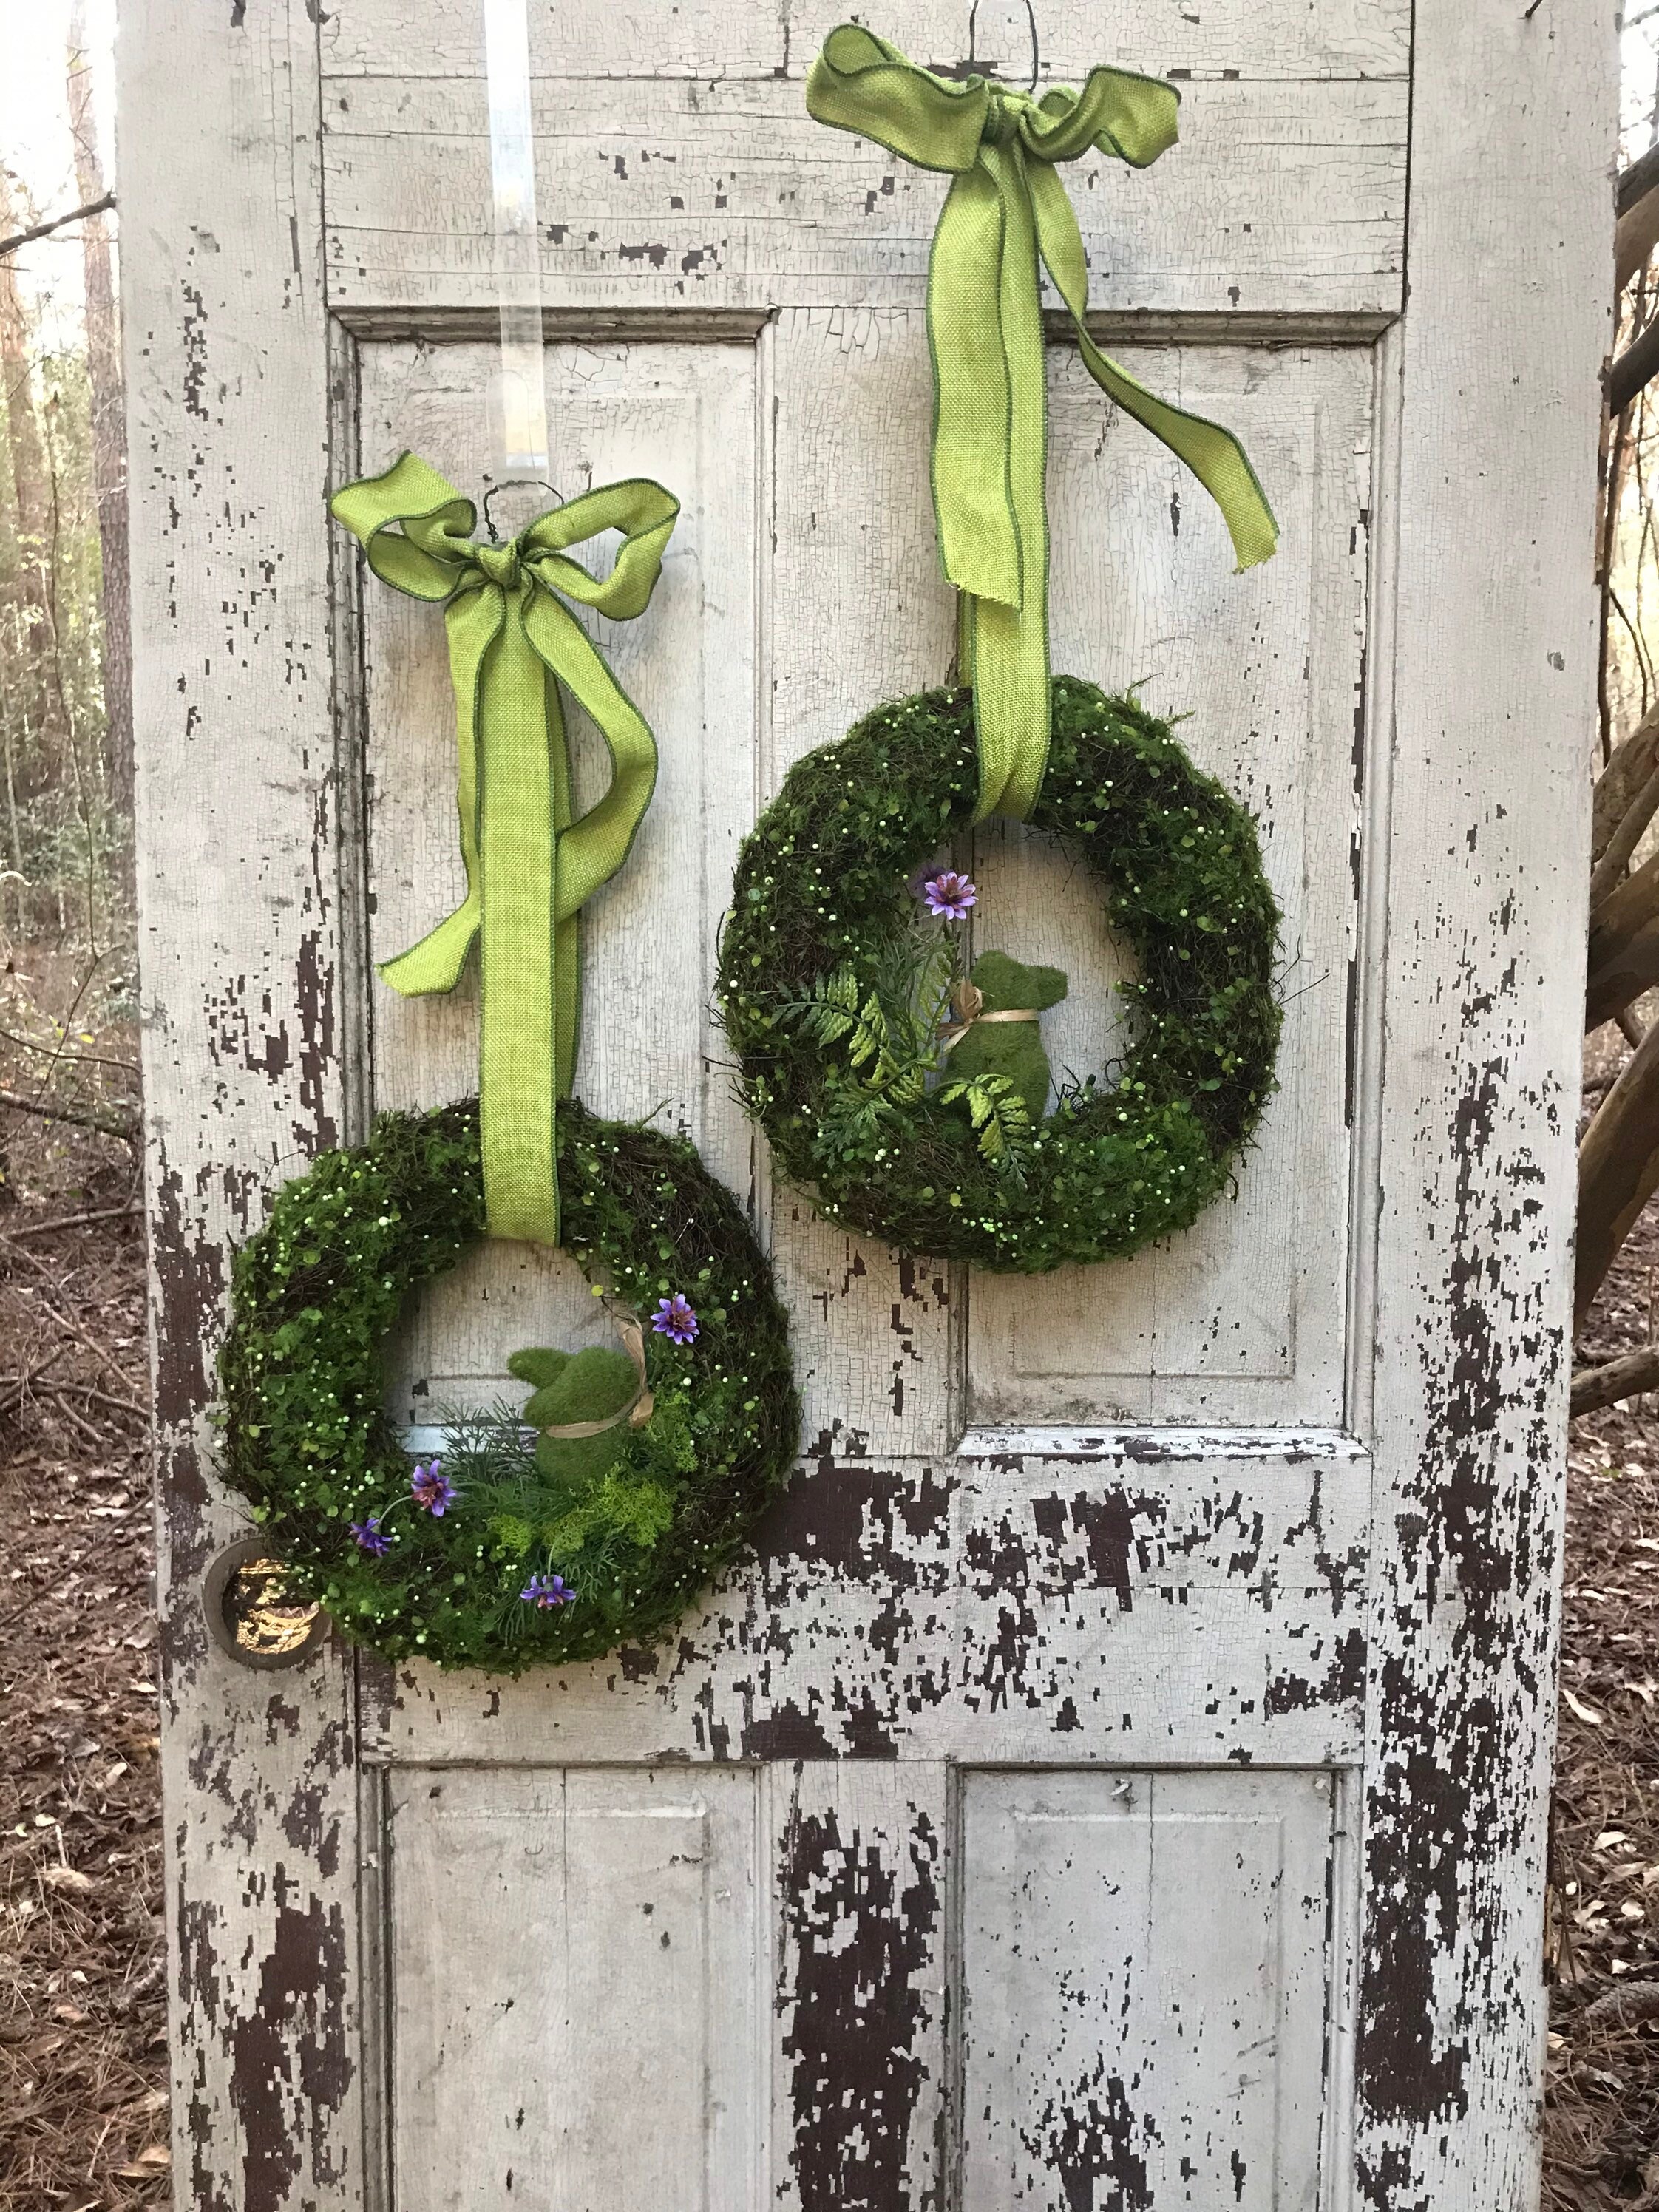 Dried Natural Mood Moss Wreath - 20 inch